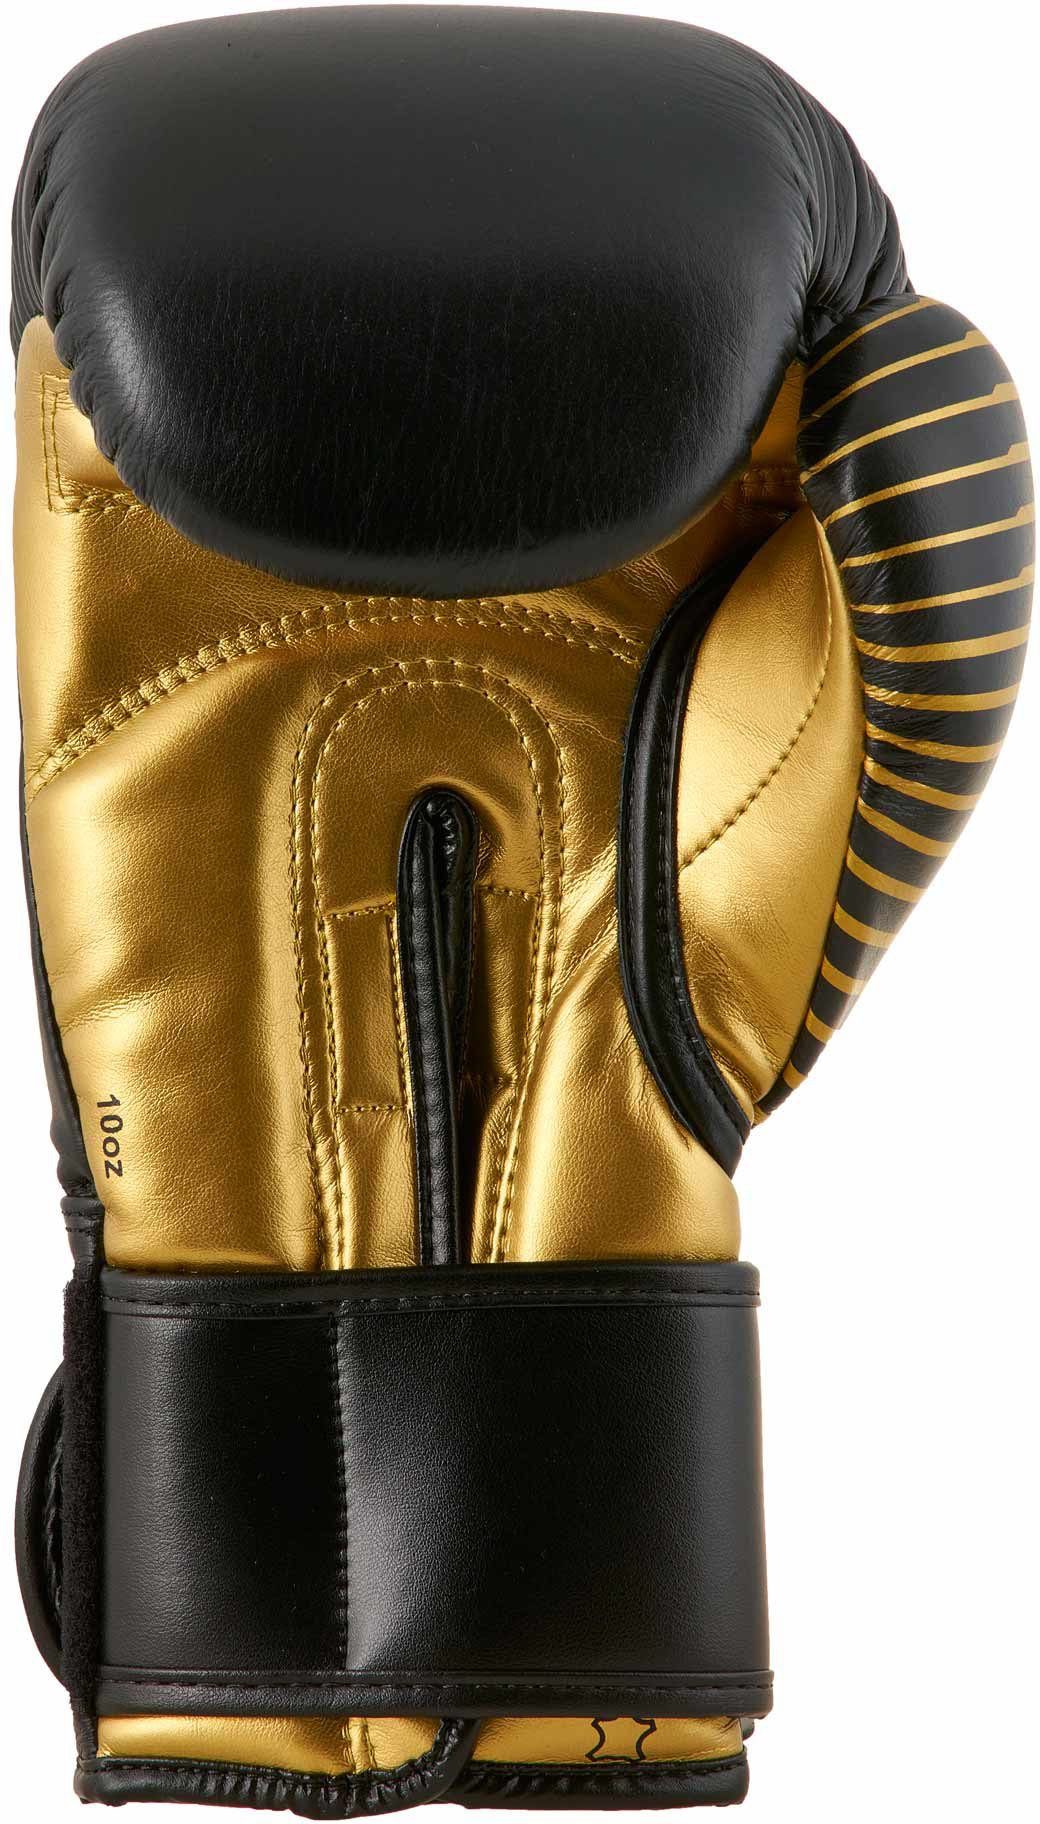 Performance Competition black/gold adidas Boxhandschuhe Handschuh